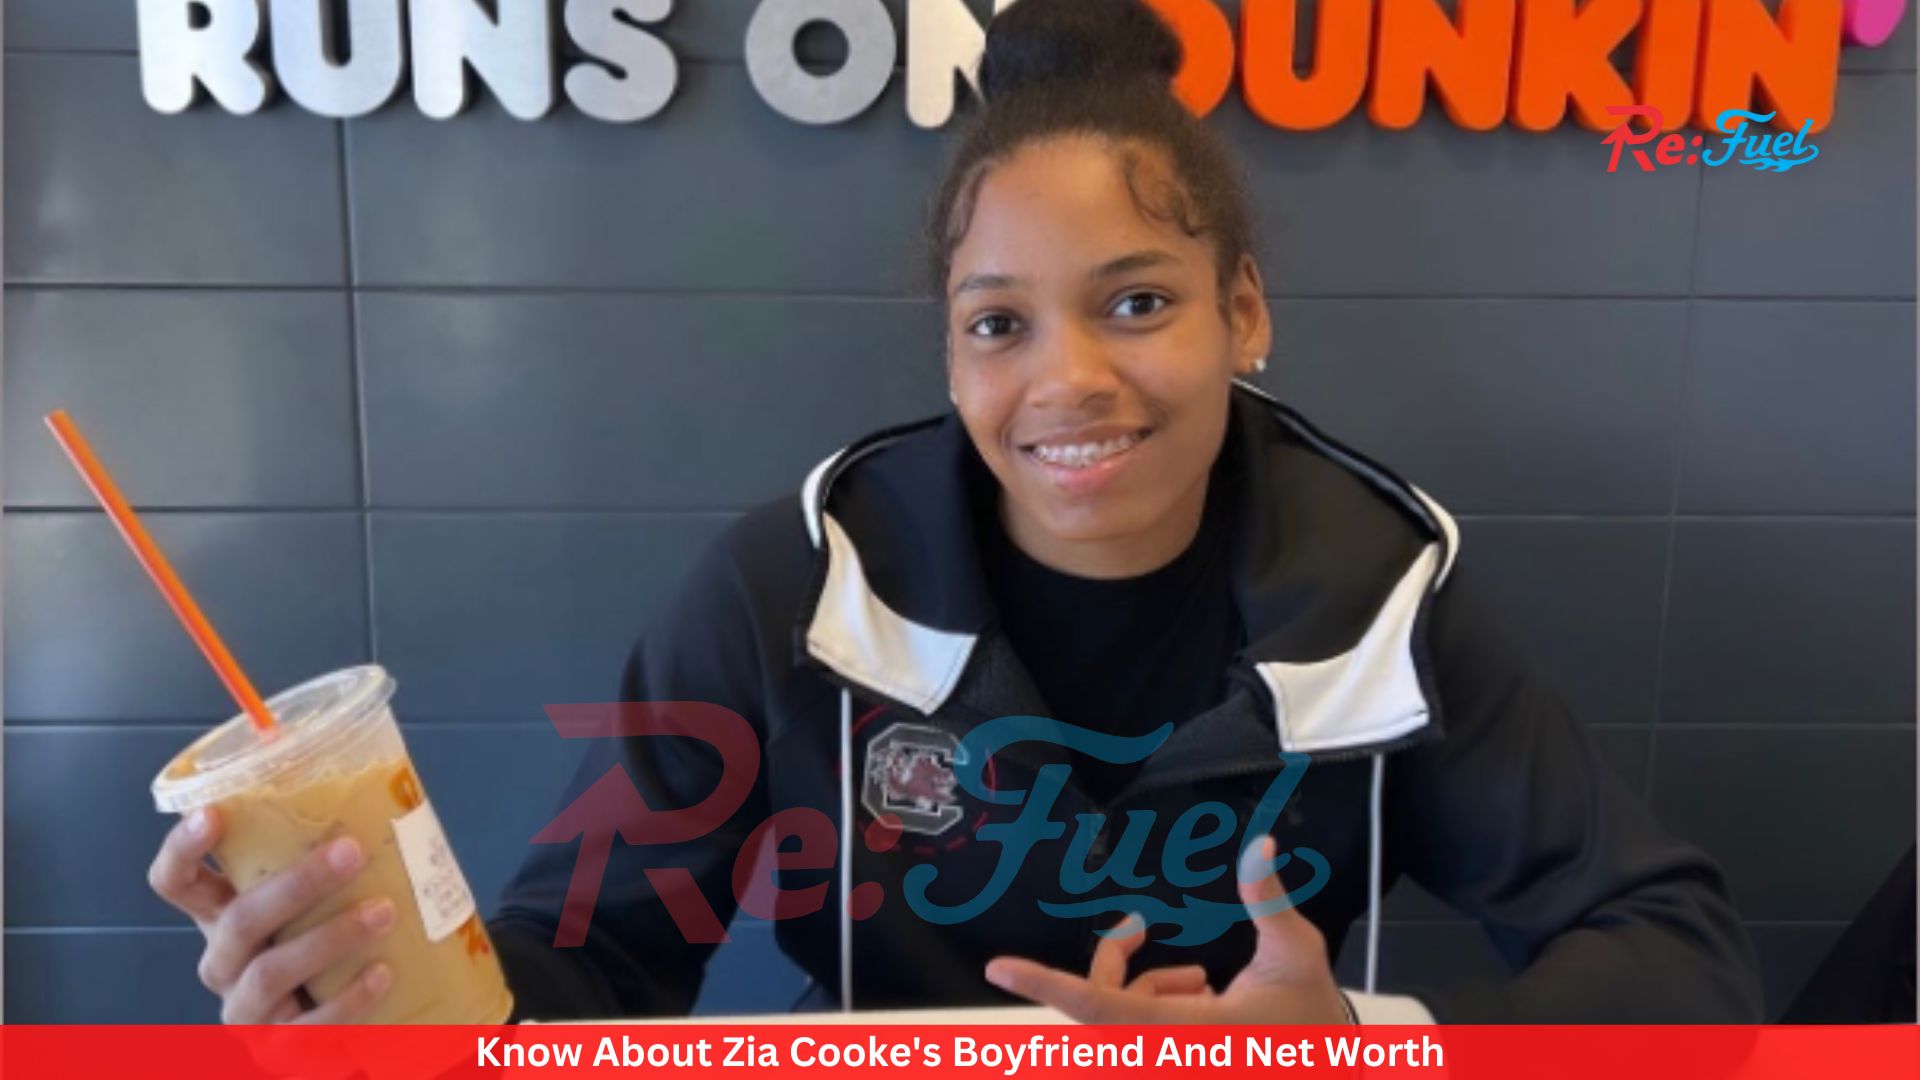 Know About Zia Cooke's Boyfriend And Net Worth